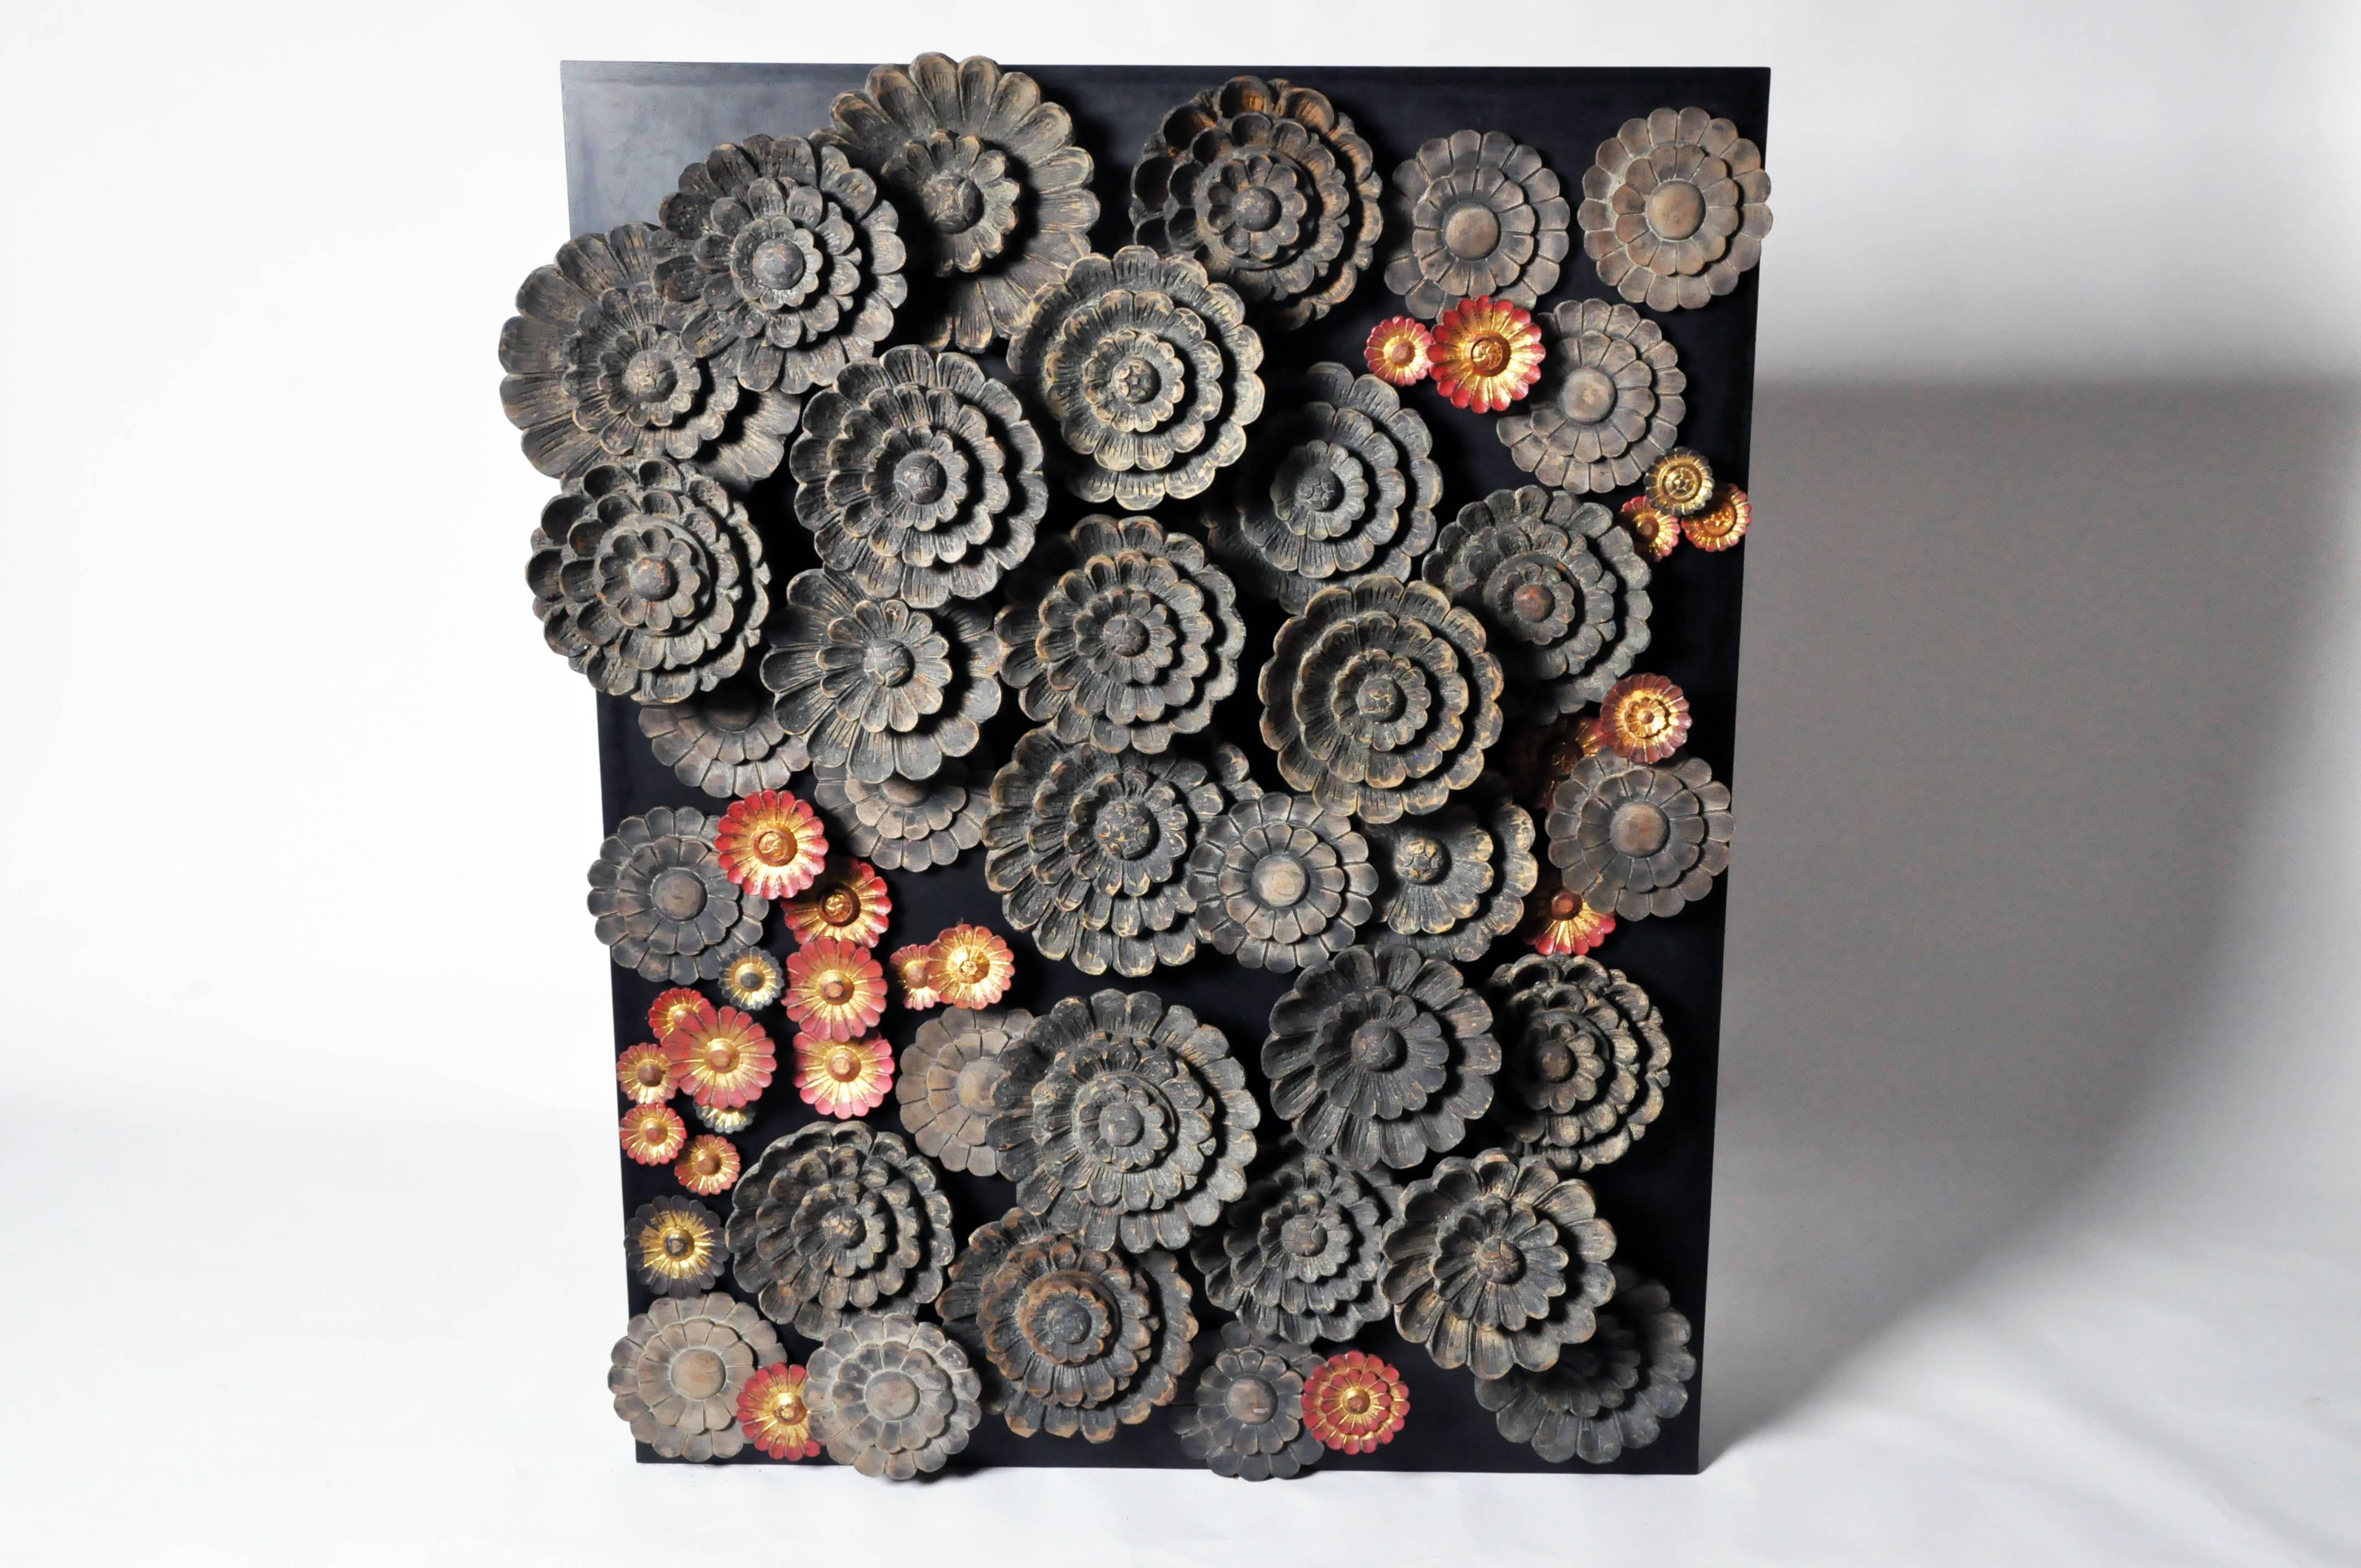 This three-dimensional wall sculpture features two types of hand-carved teakwood lotus blossoms; the larger having a matte black finish while the smaller have gold leaf centers surrounded by black or red lacquer. Mounted at various heights, the